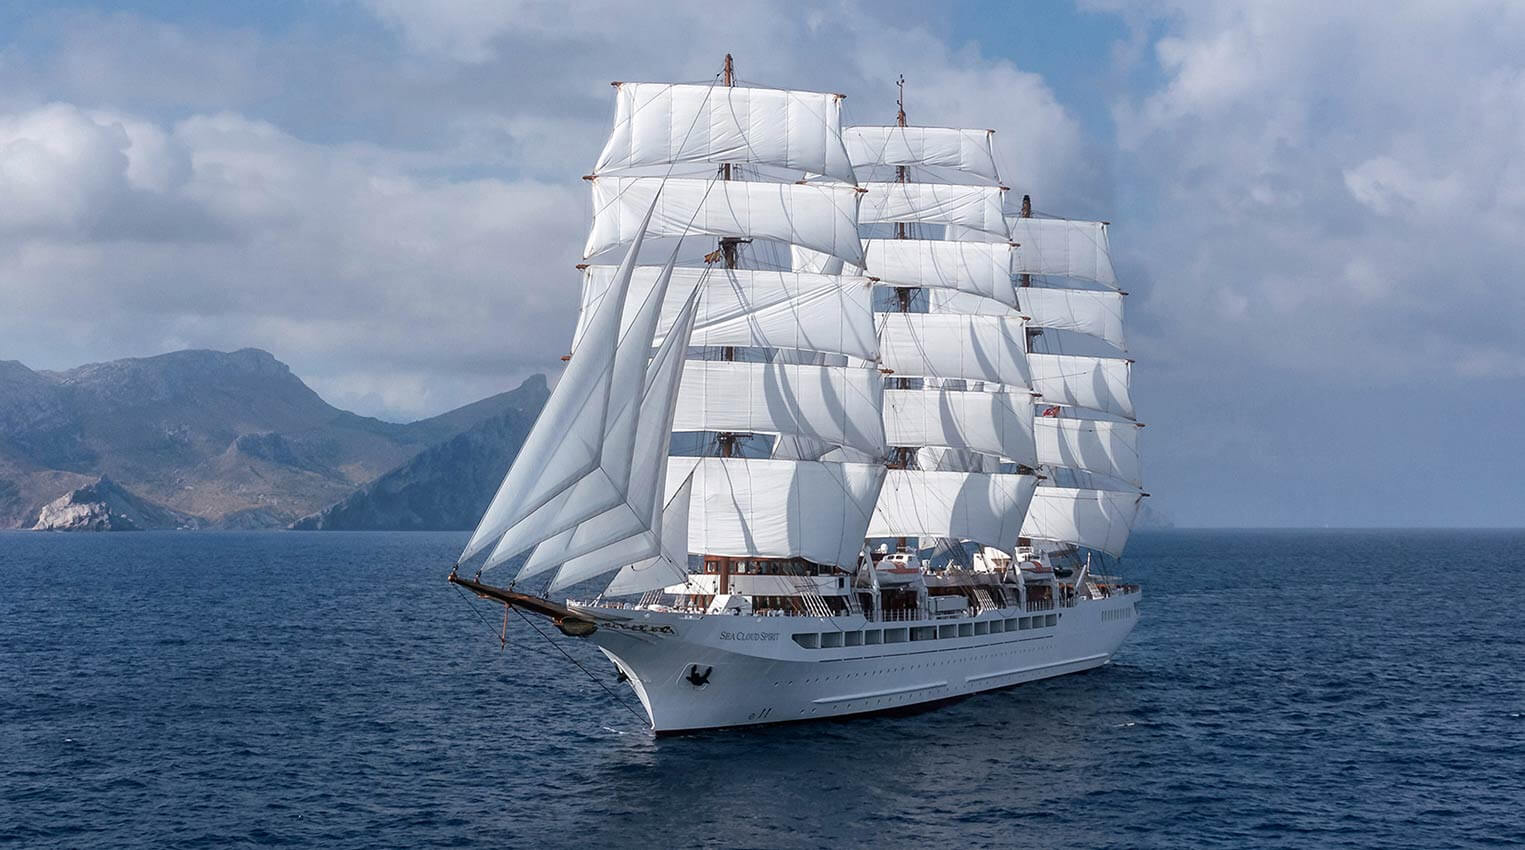 Inside the world's biggest commercial sailing ship - Mysailing